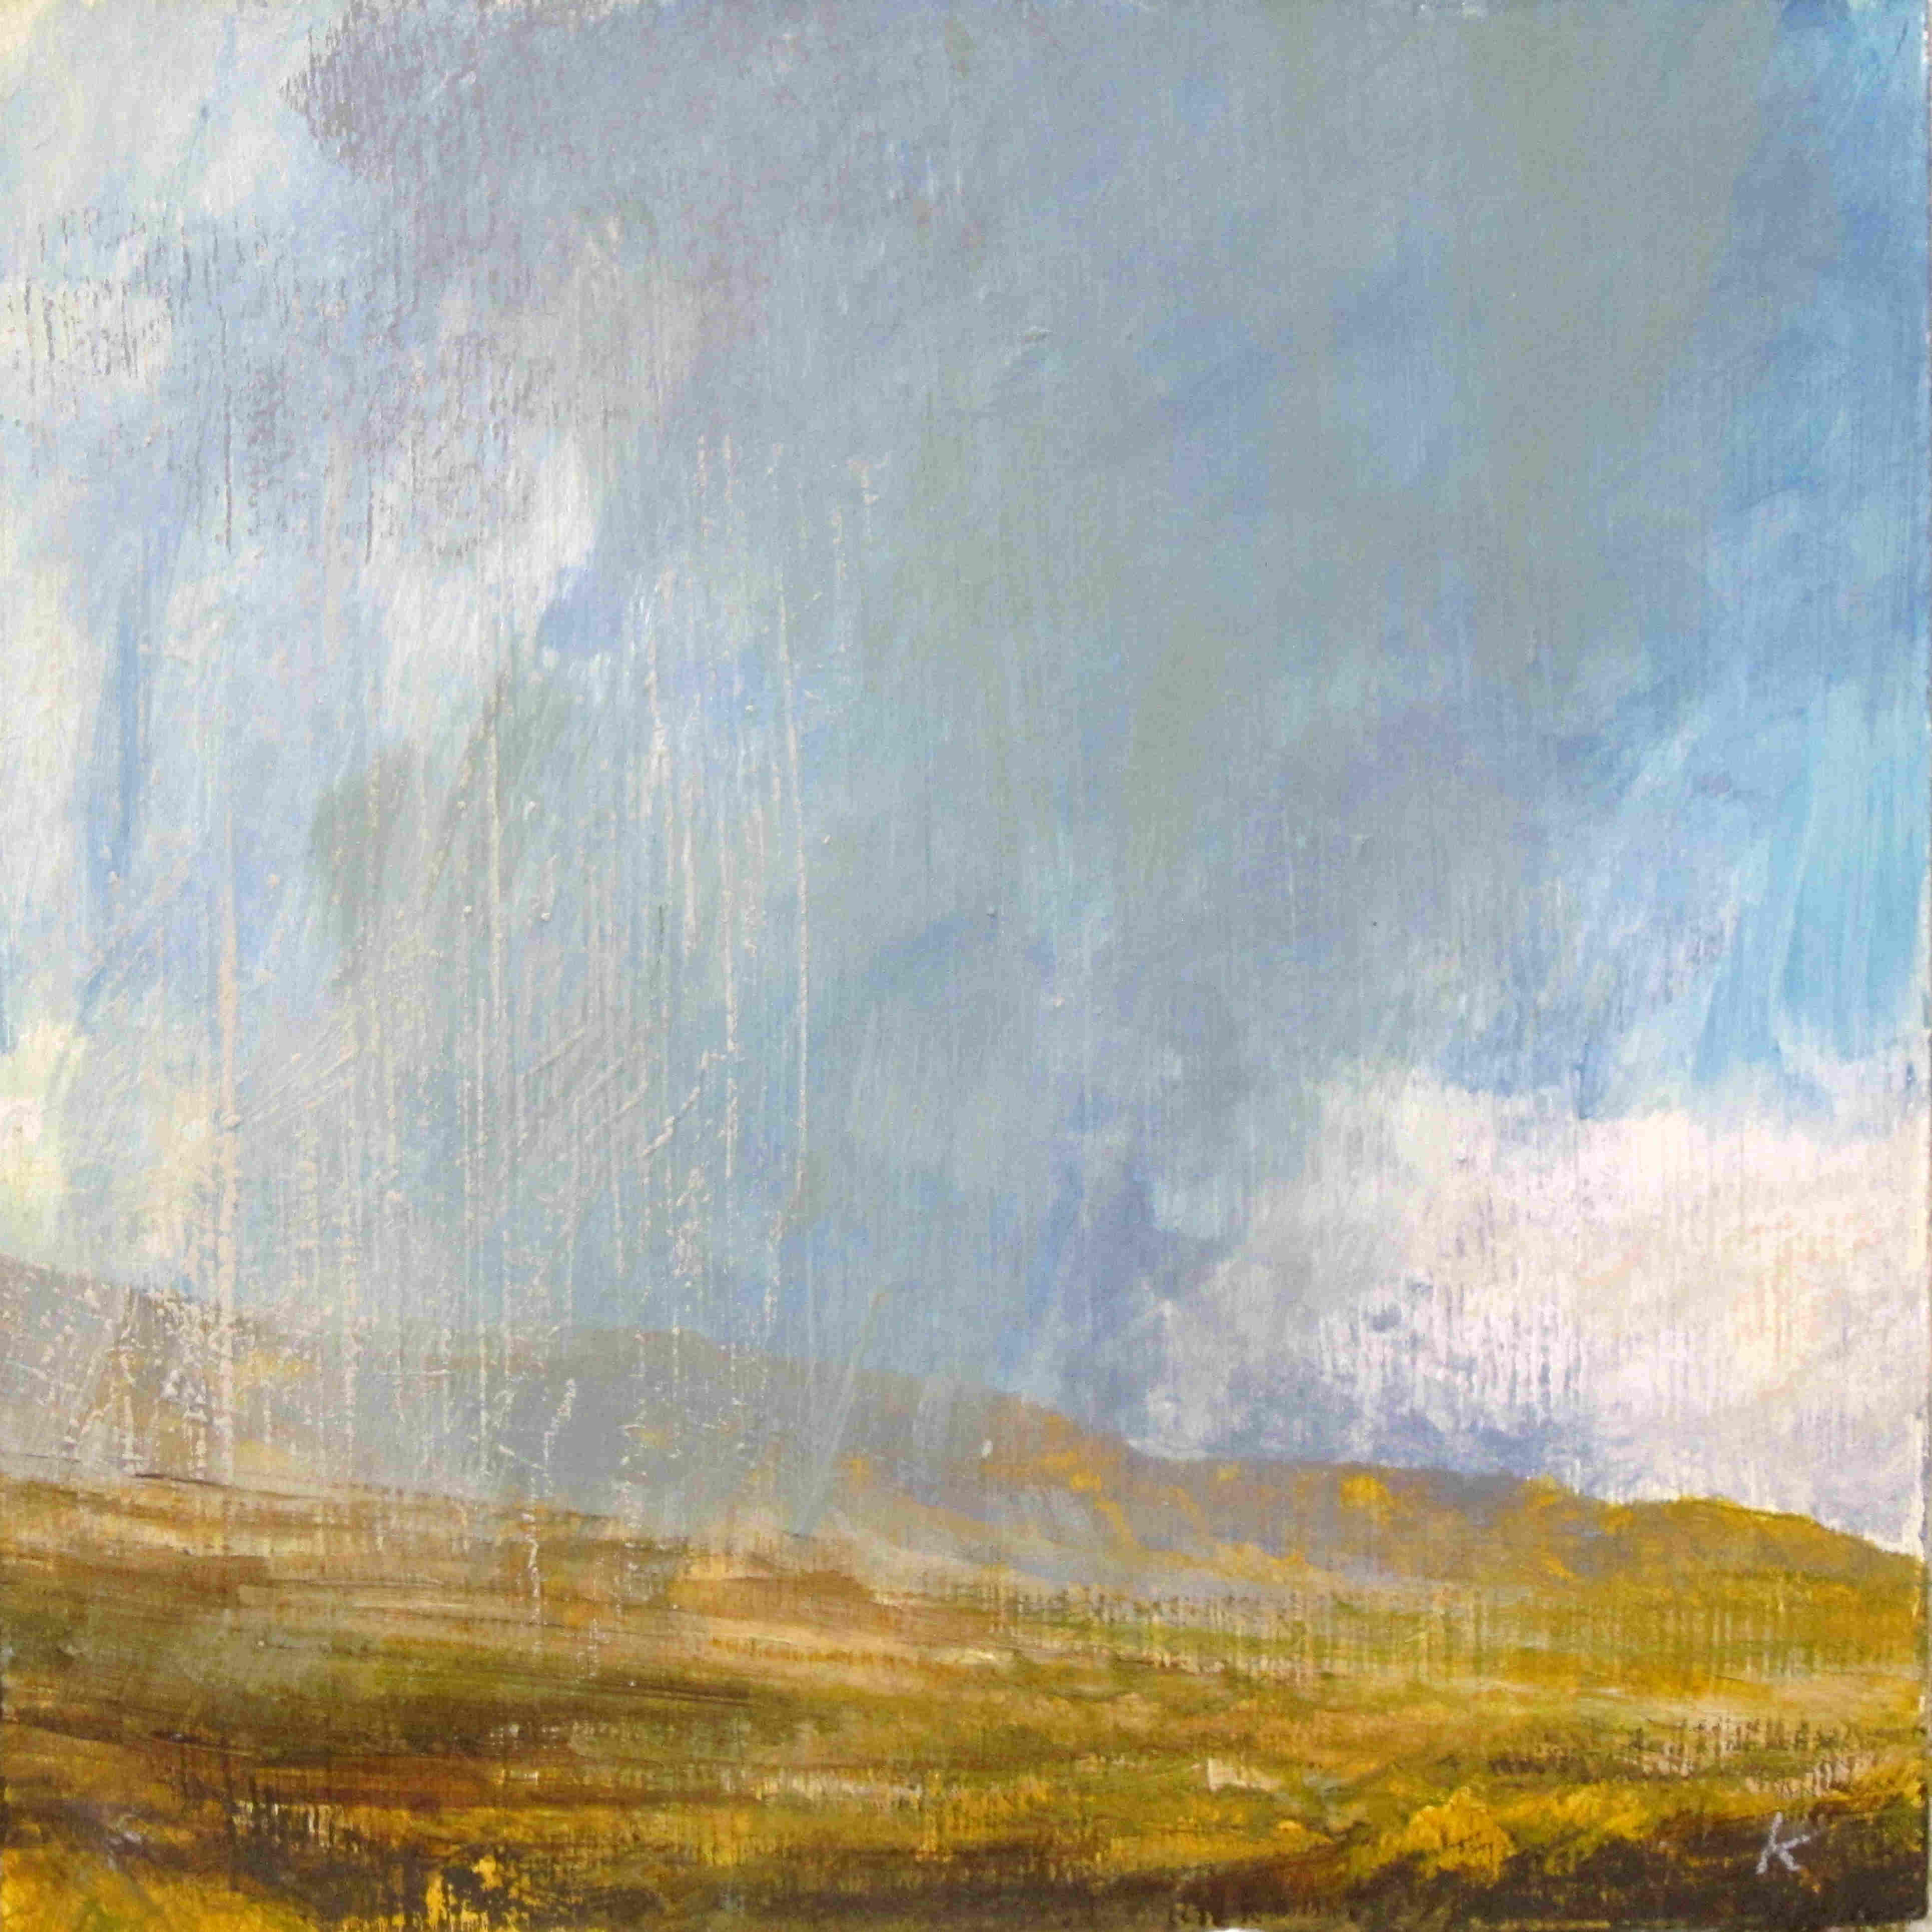 'Squall, On the edge of Rannoch Moor' by artist Keith Salmon